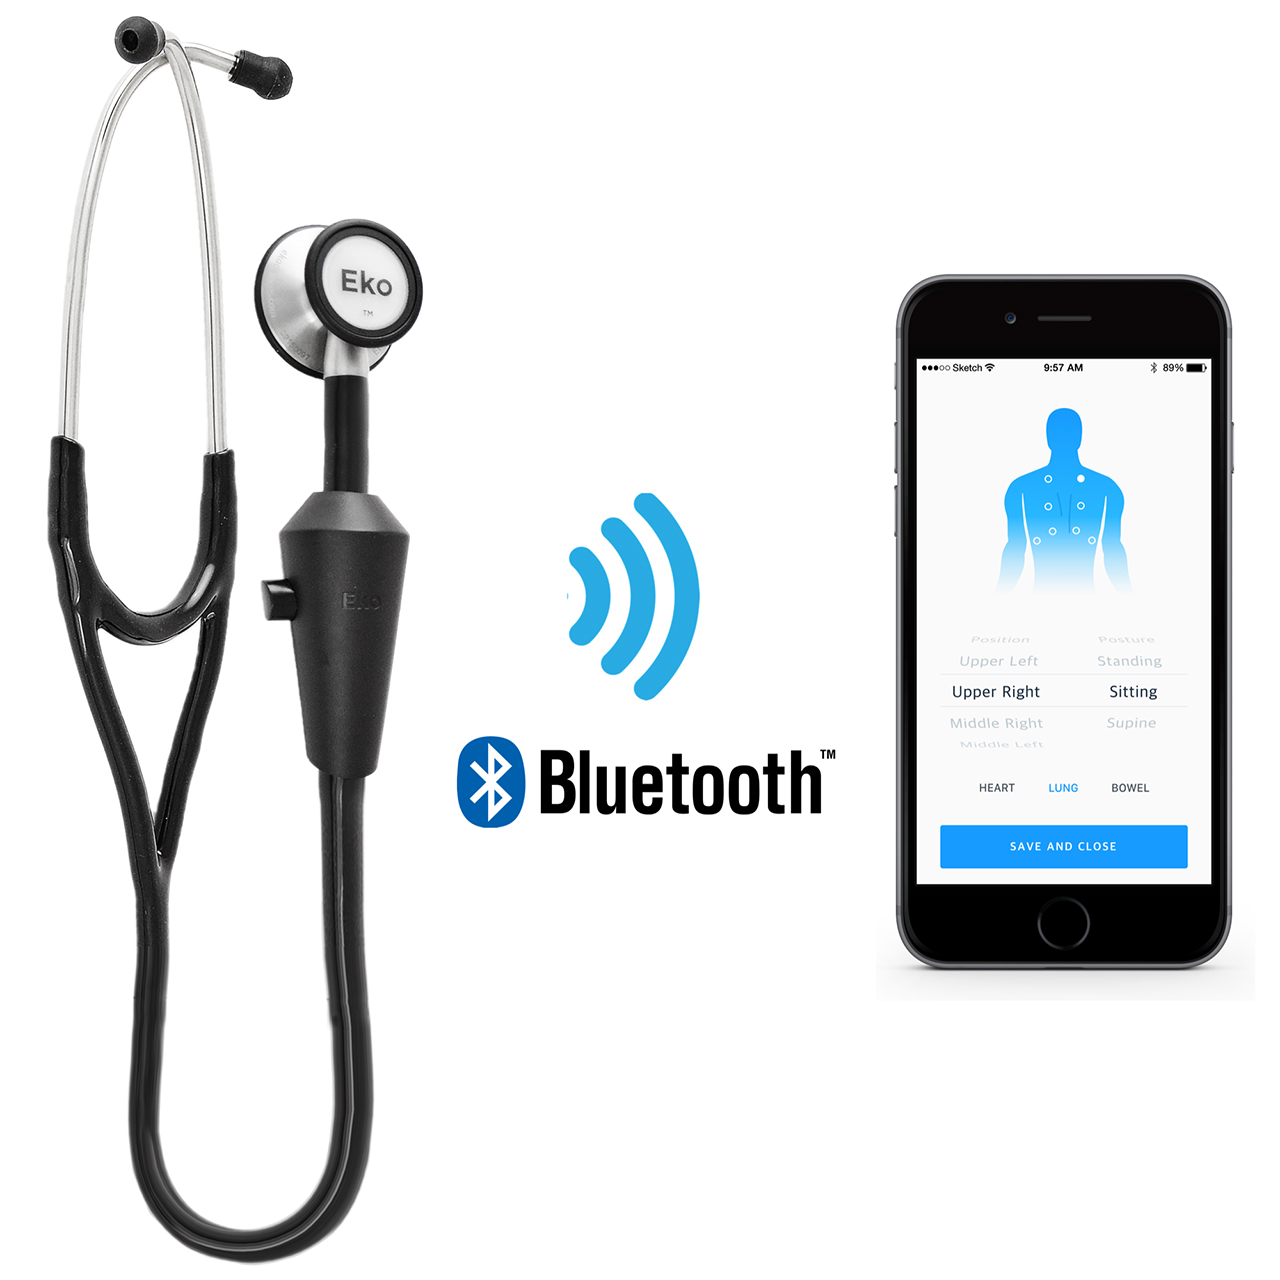 Eko Stethoscope connects to mobile app for auscultation recording.